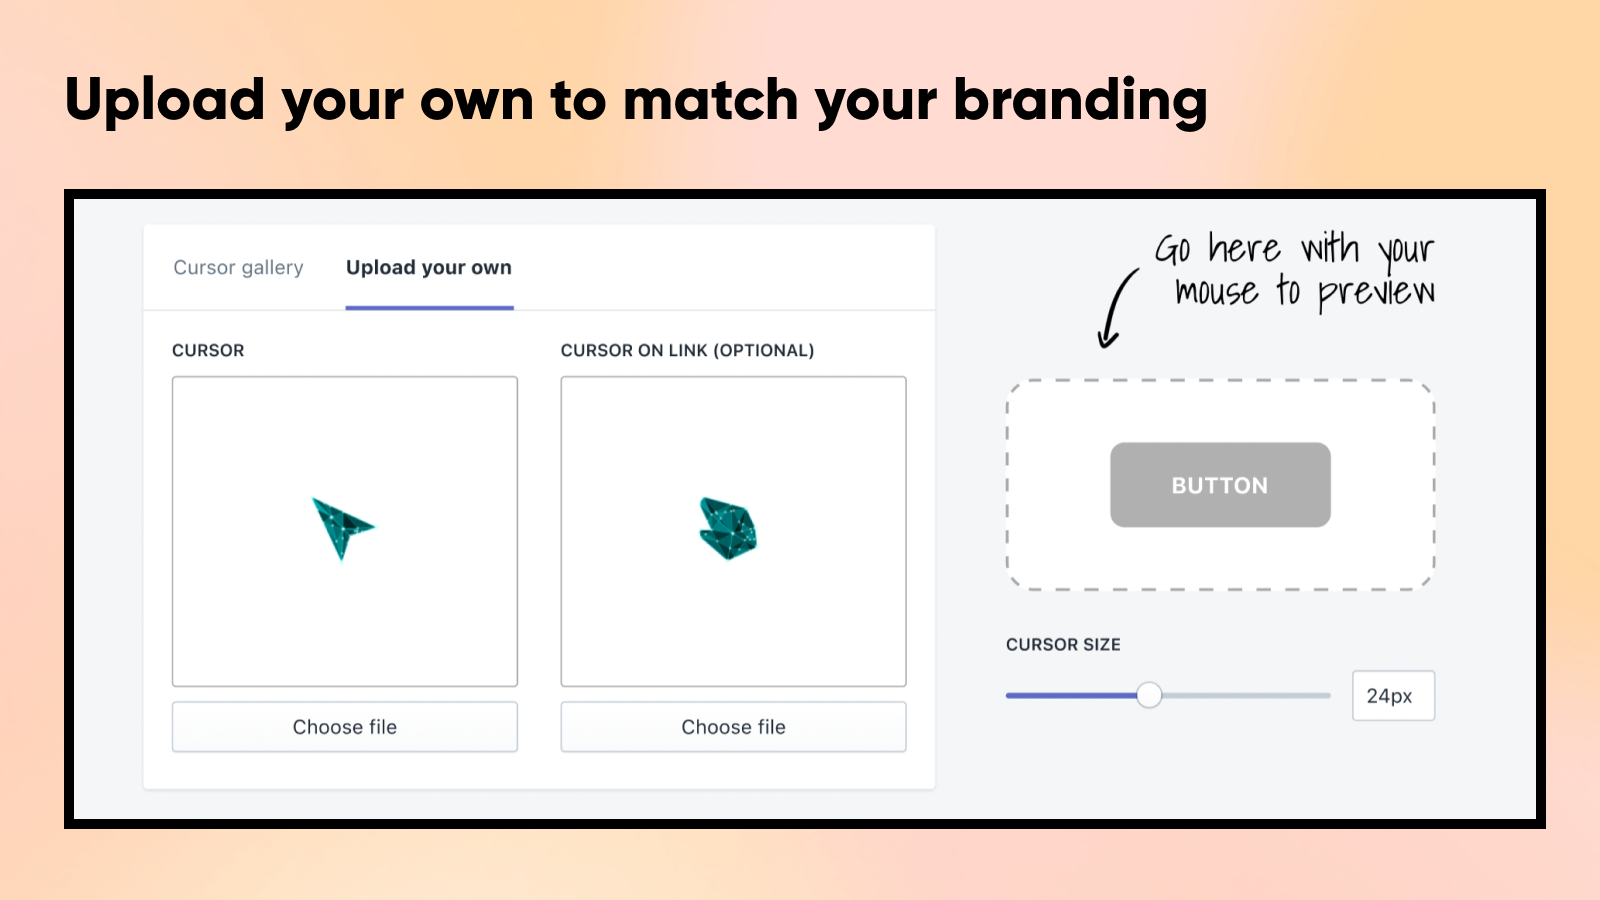 Upload your own to match your branding